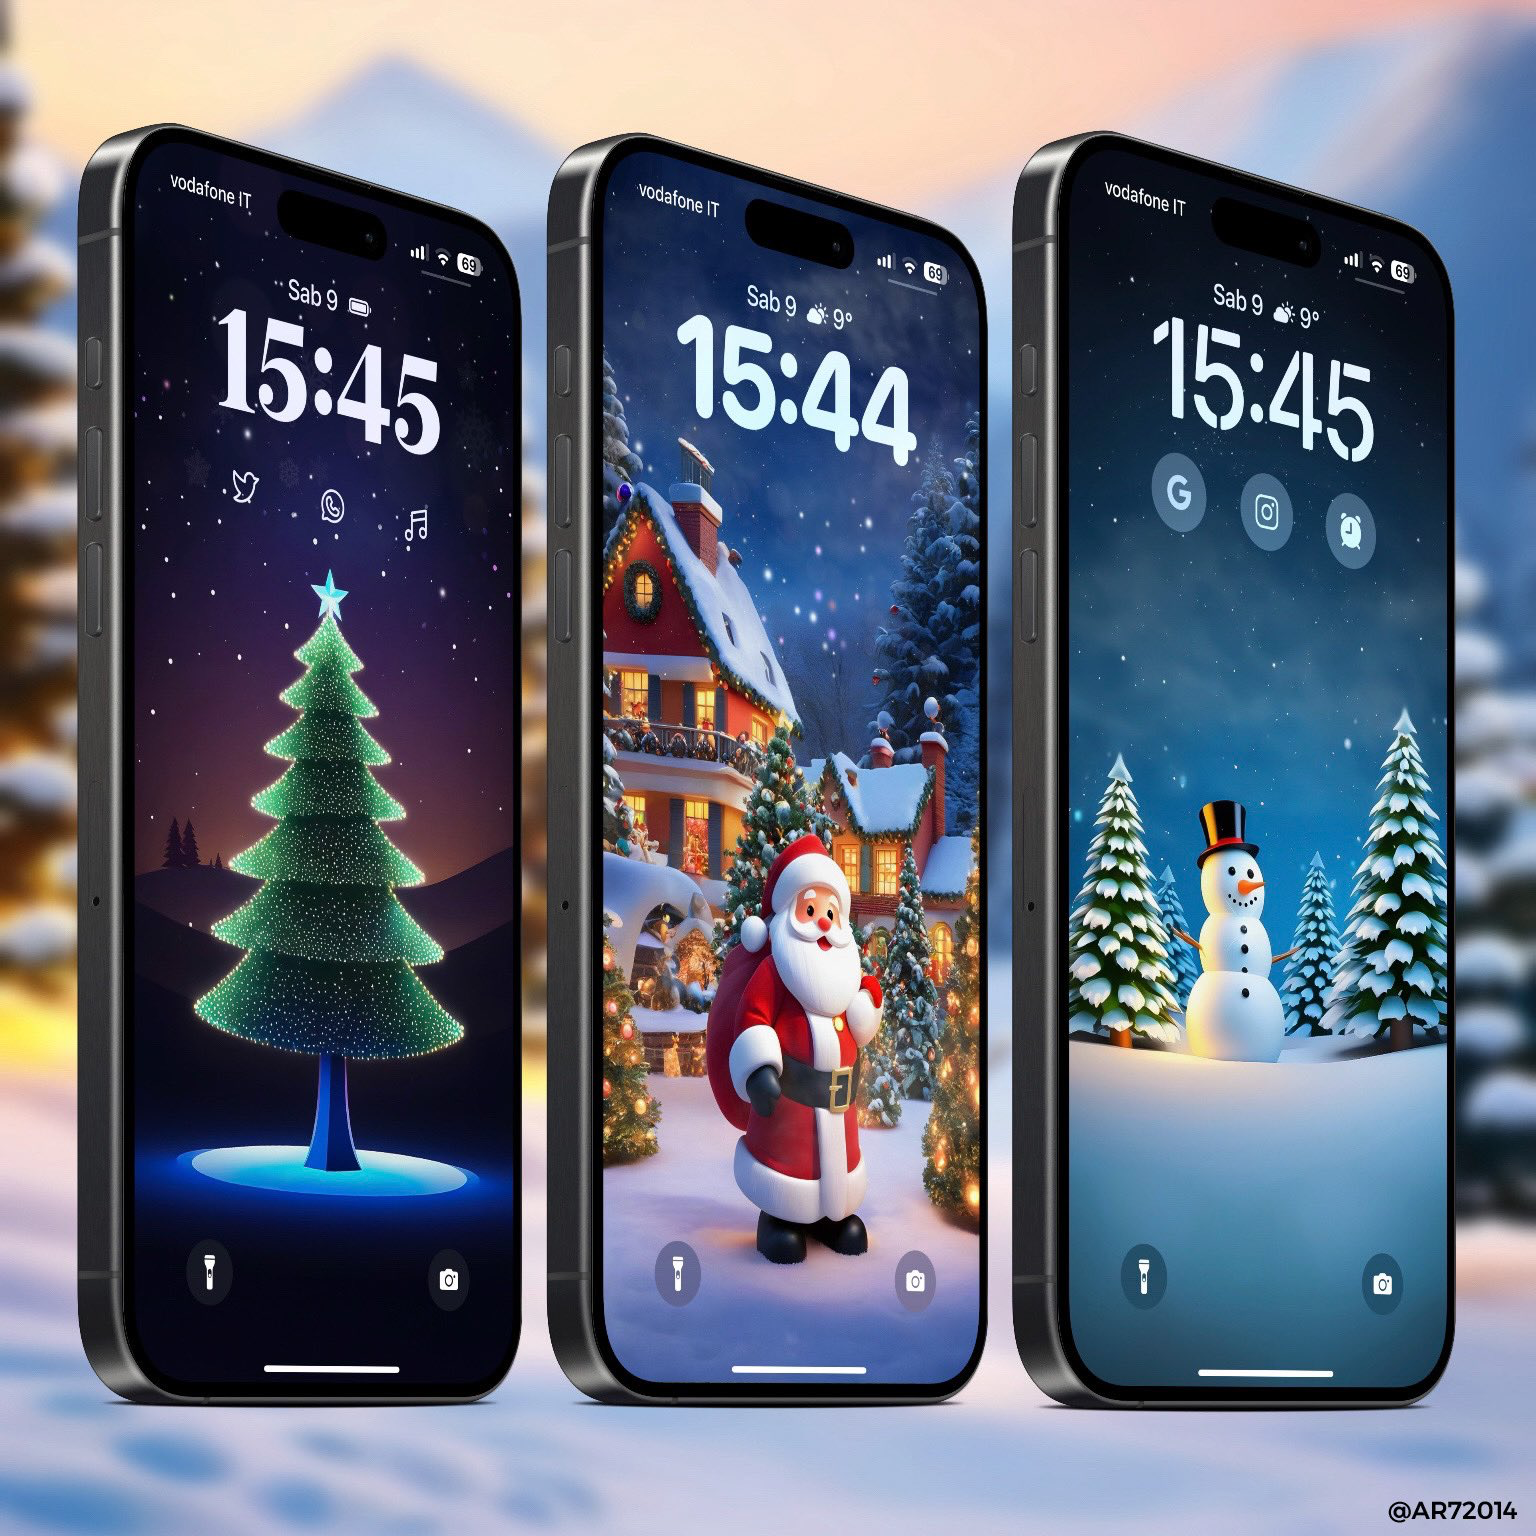 Christmas scenery wallpapers for iPhone